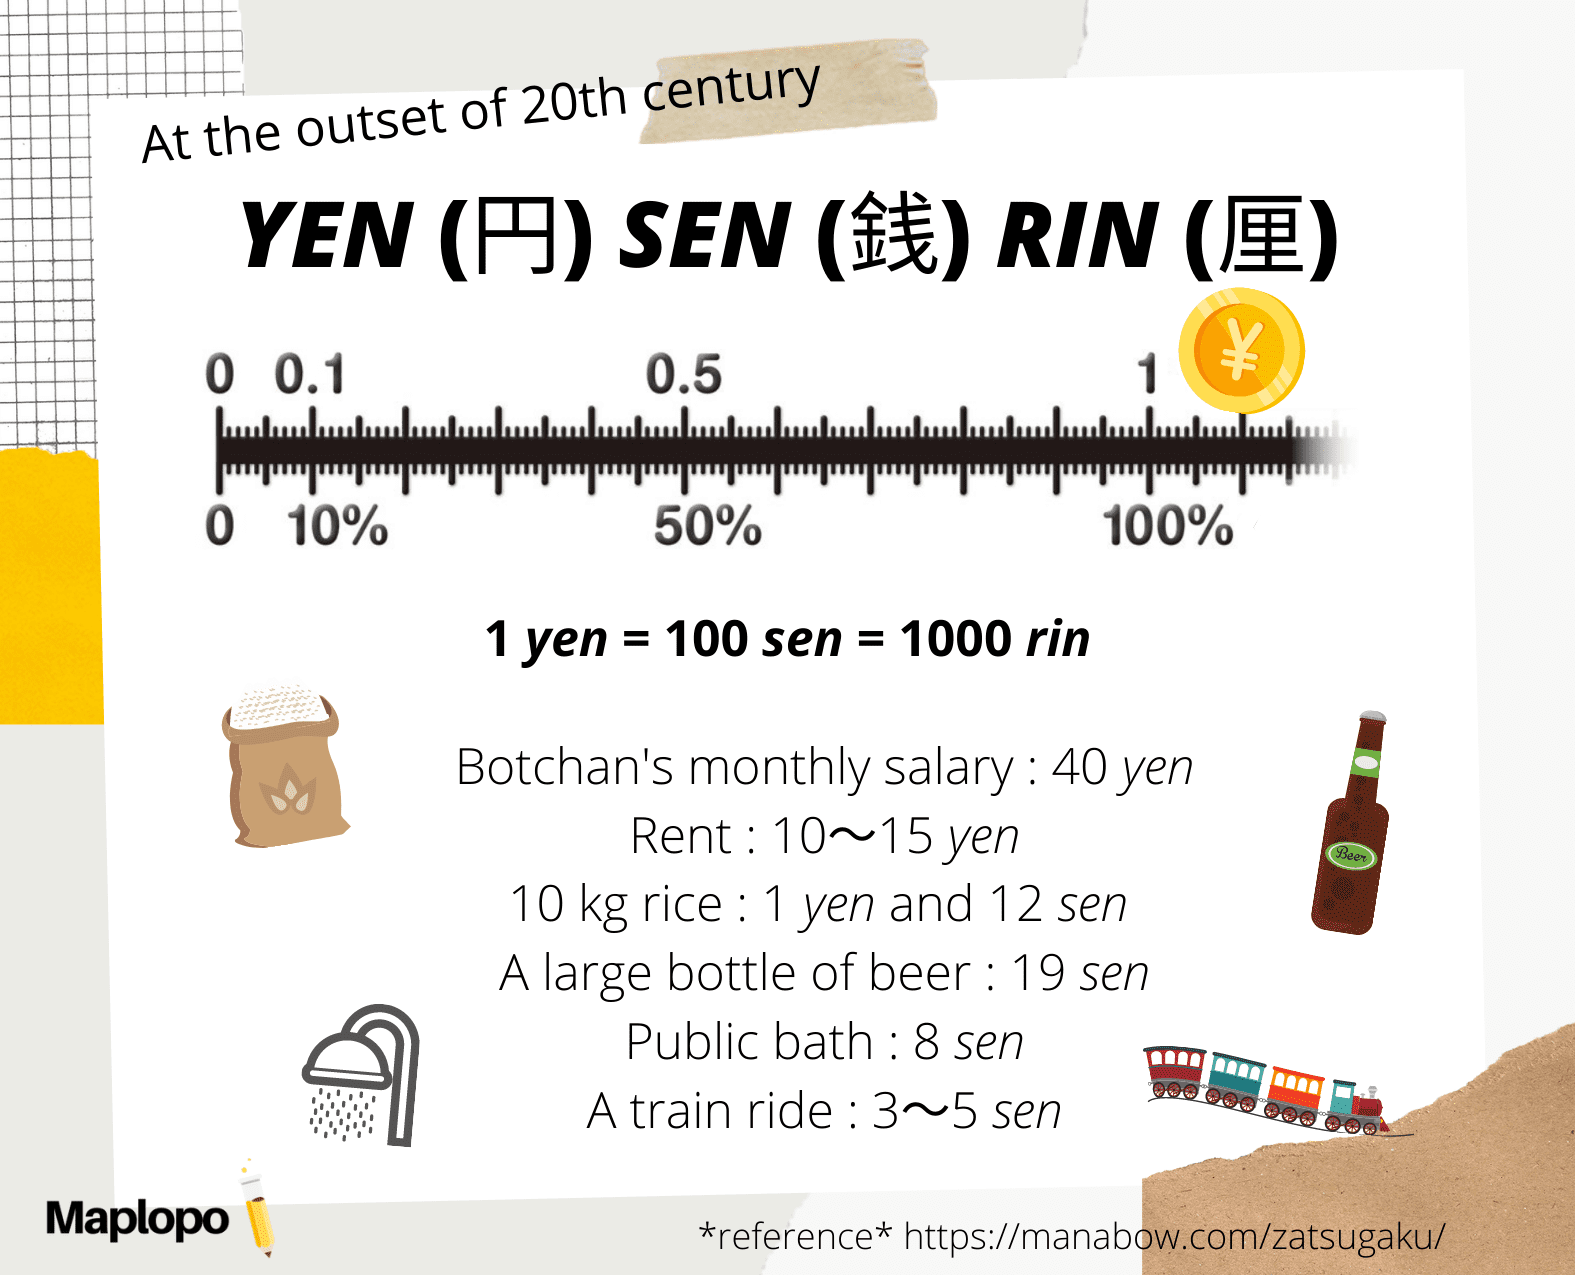 Yen Value in the Early 20th Century, Maplopo